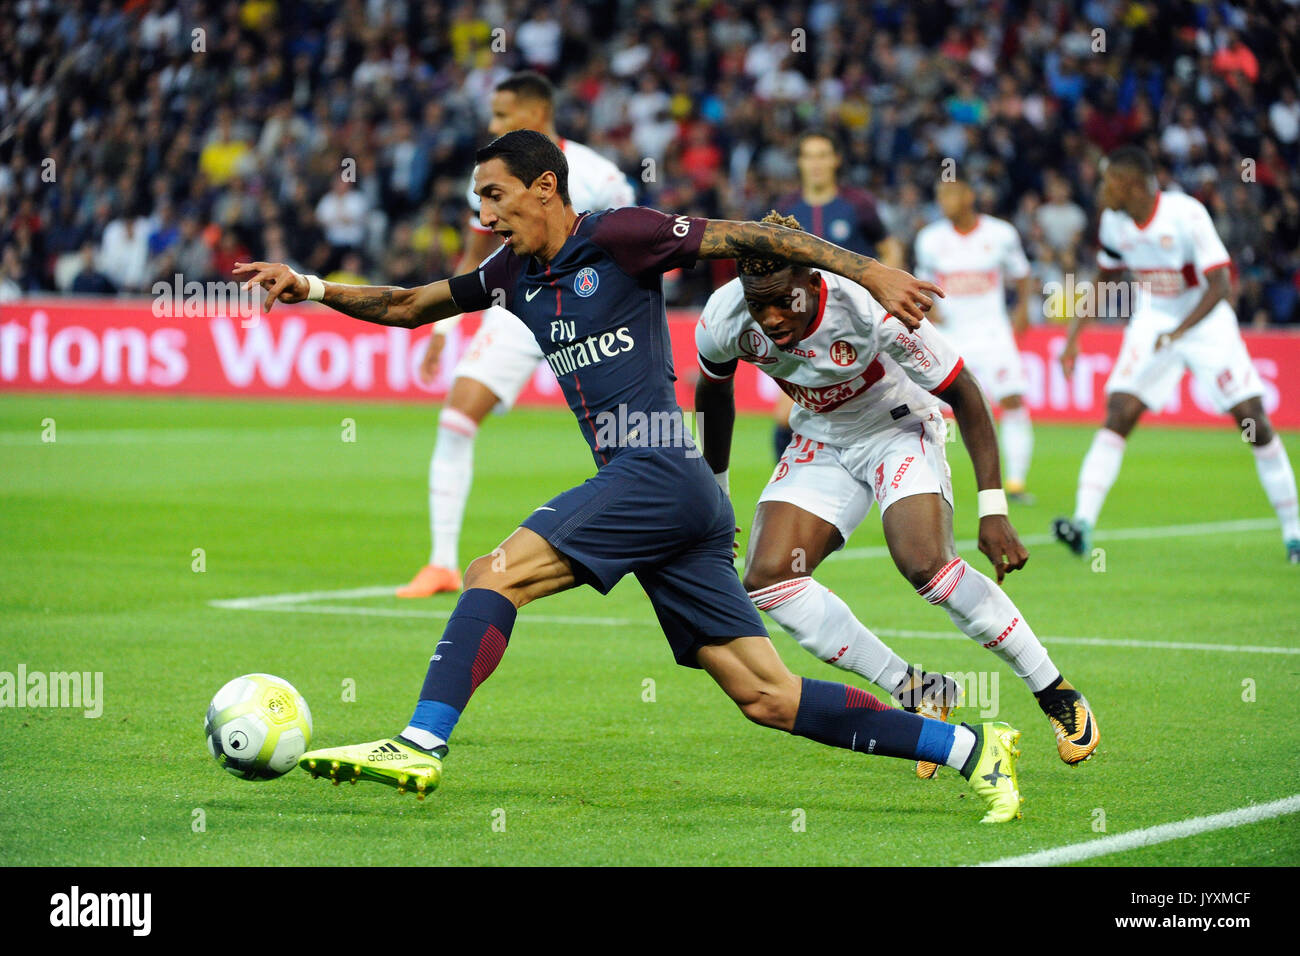 Paris. 20th Aug, 2017. Angel Di Maria (L) from Paris Saint Germain competes with Francois Moubandje (R) from Toulouse FC during their match of French Ligue 1 2017-2018 season 3rd round in Paris, France on Aug. 20, 2017. Paris Saint Germain won Toulouse FC with 6-2 at home. Credit: Jean-Marie Hervio/Xinhua/Alamy Live News Stock Photo